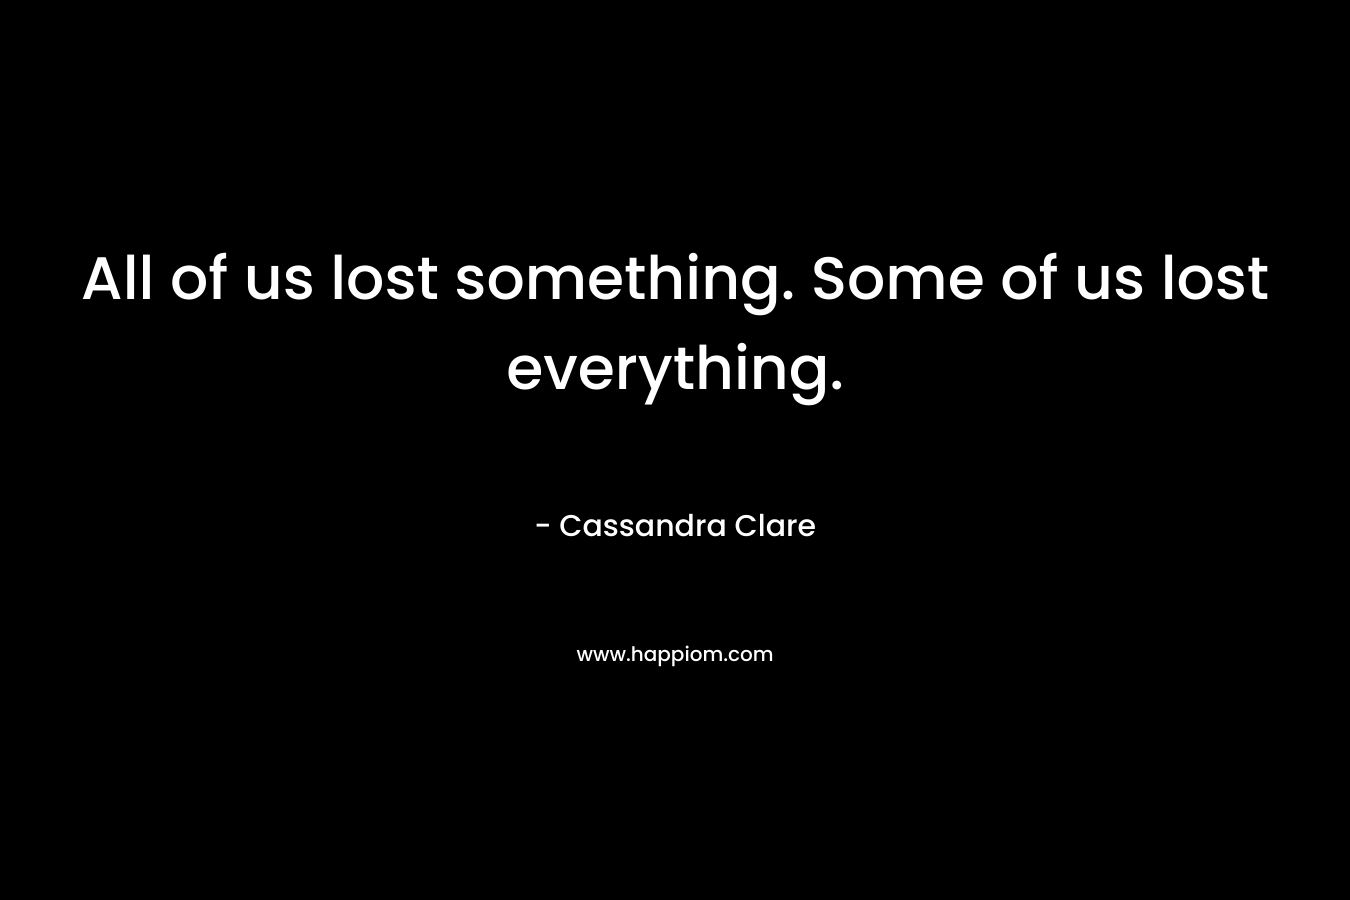 All of us lost something. Some of us lost everything.